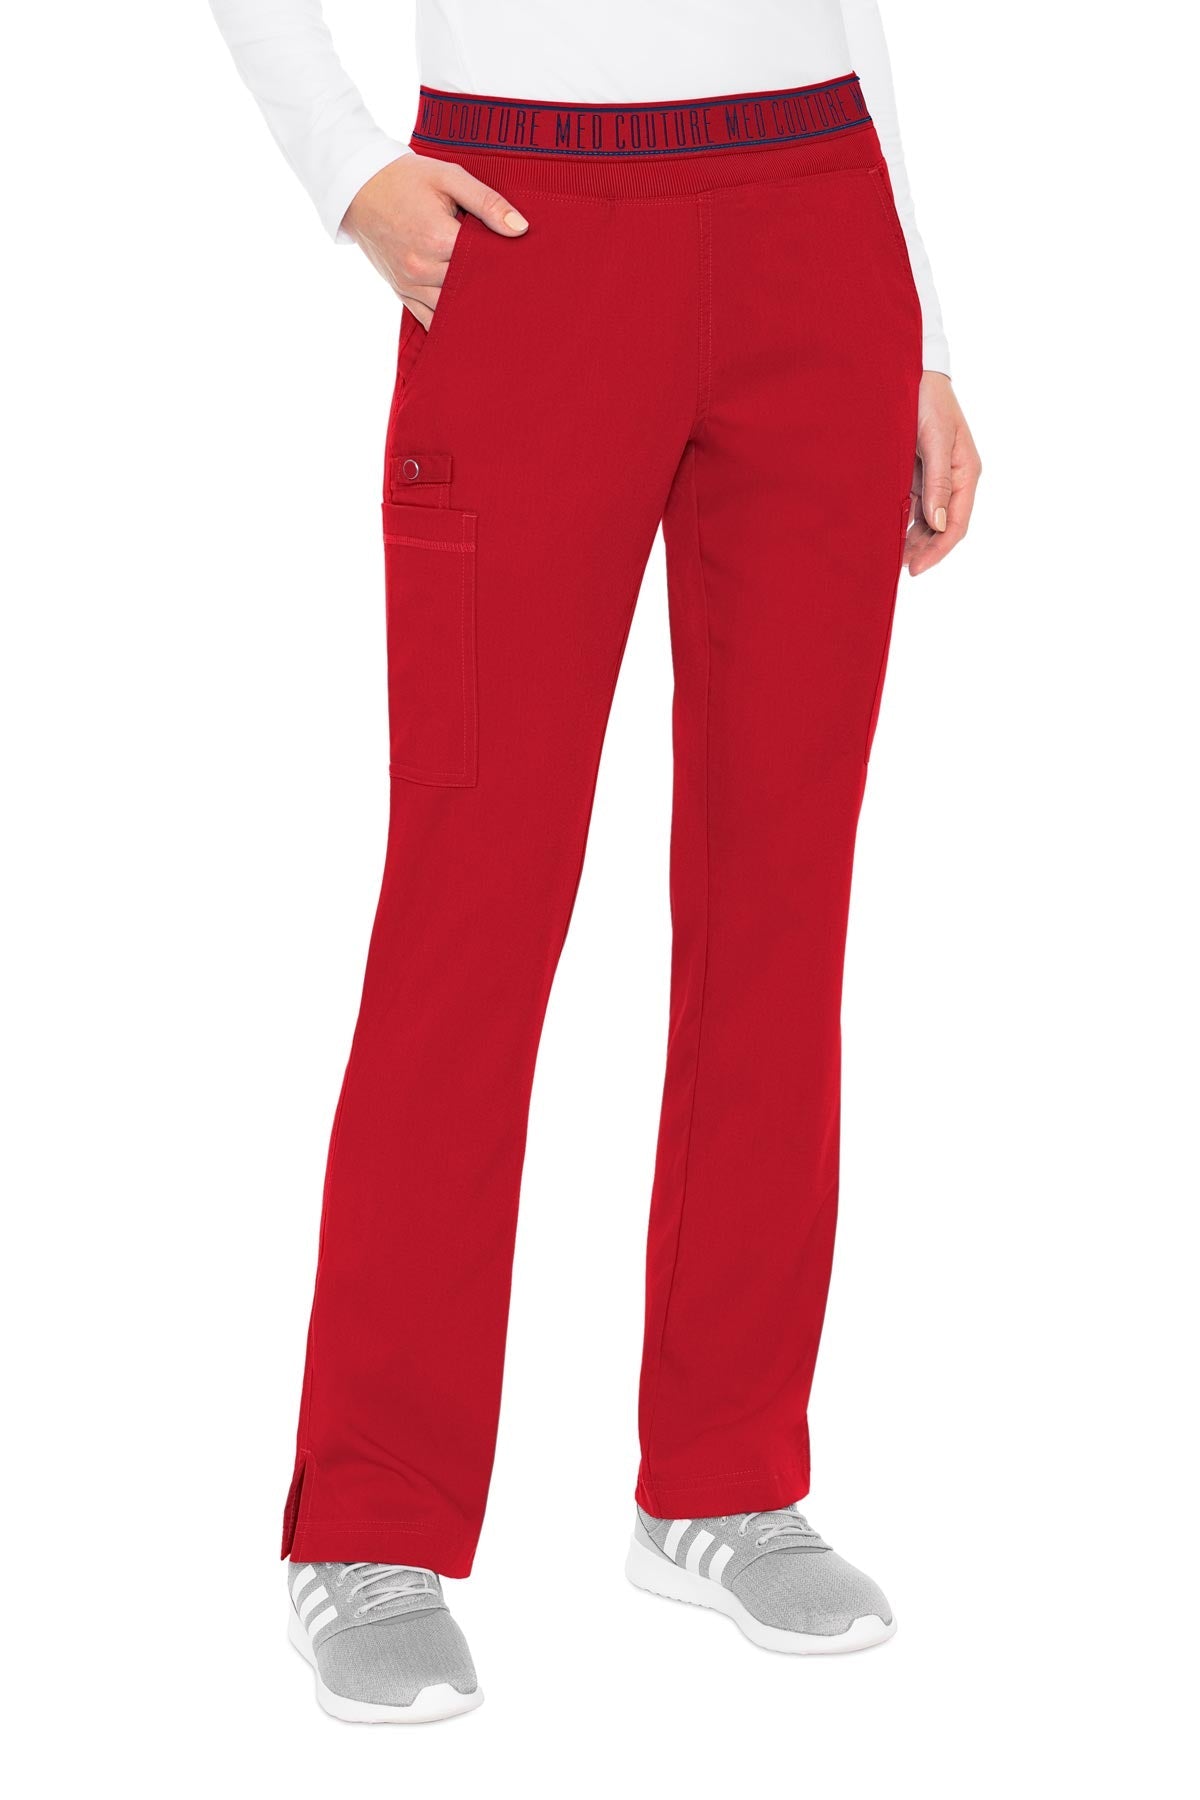 7739 Med Couture Performance Touch Yoga 7 Pocket Cargo Pant 